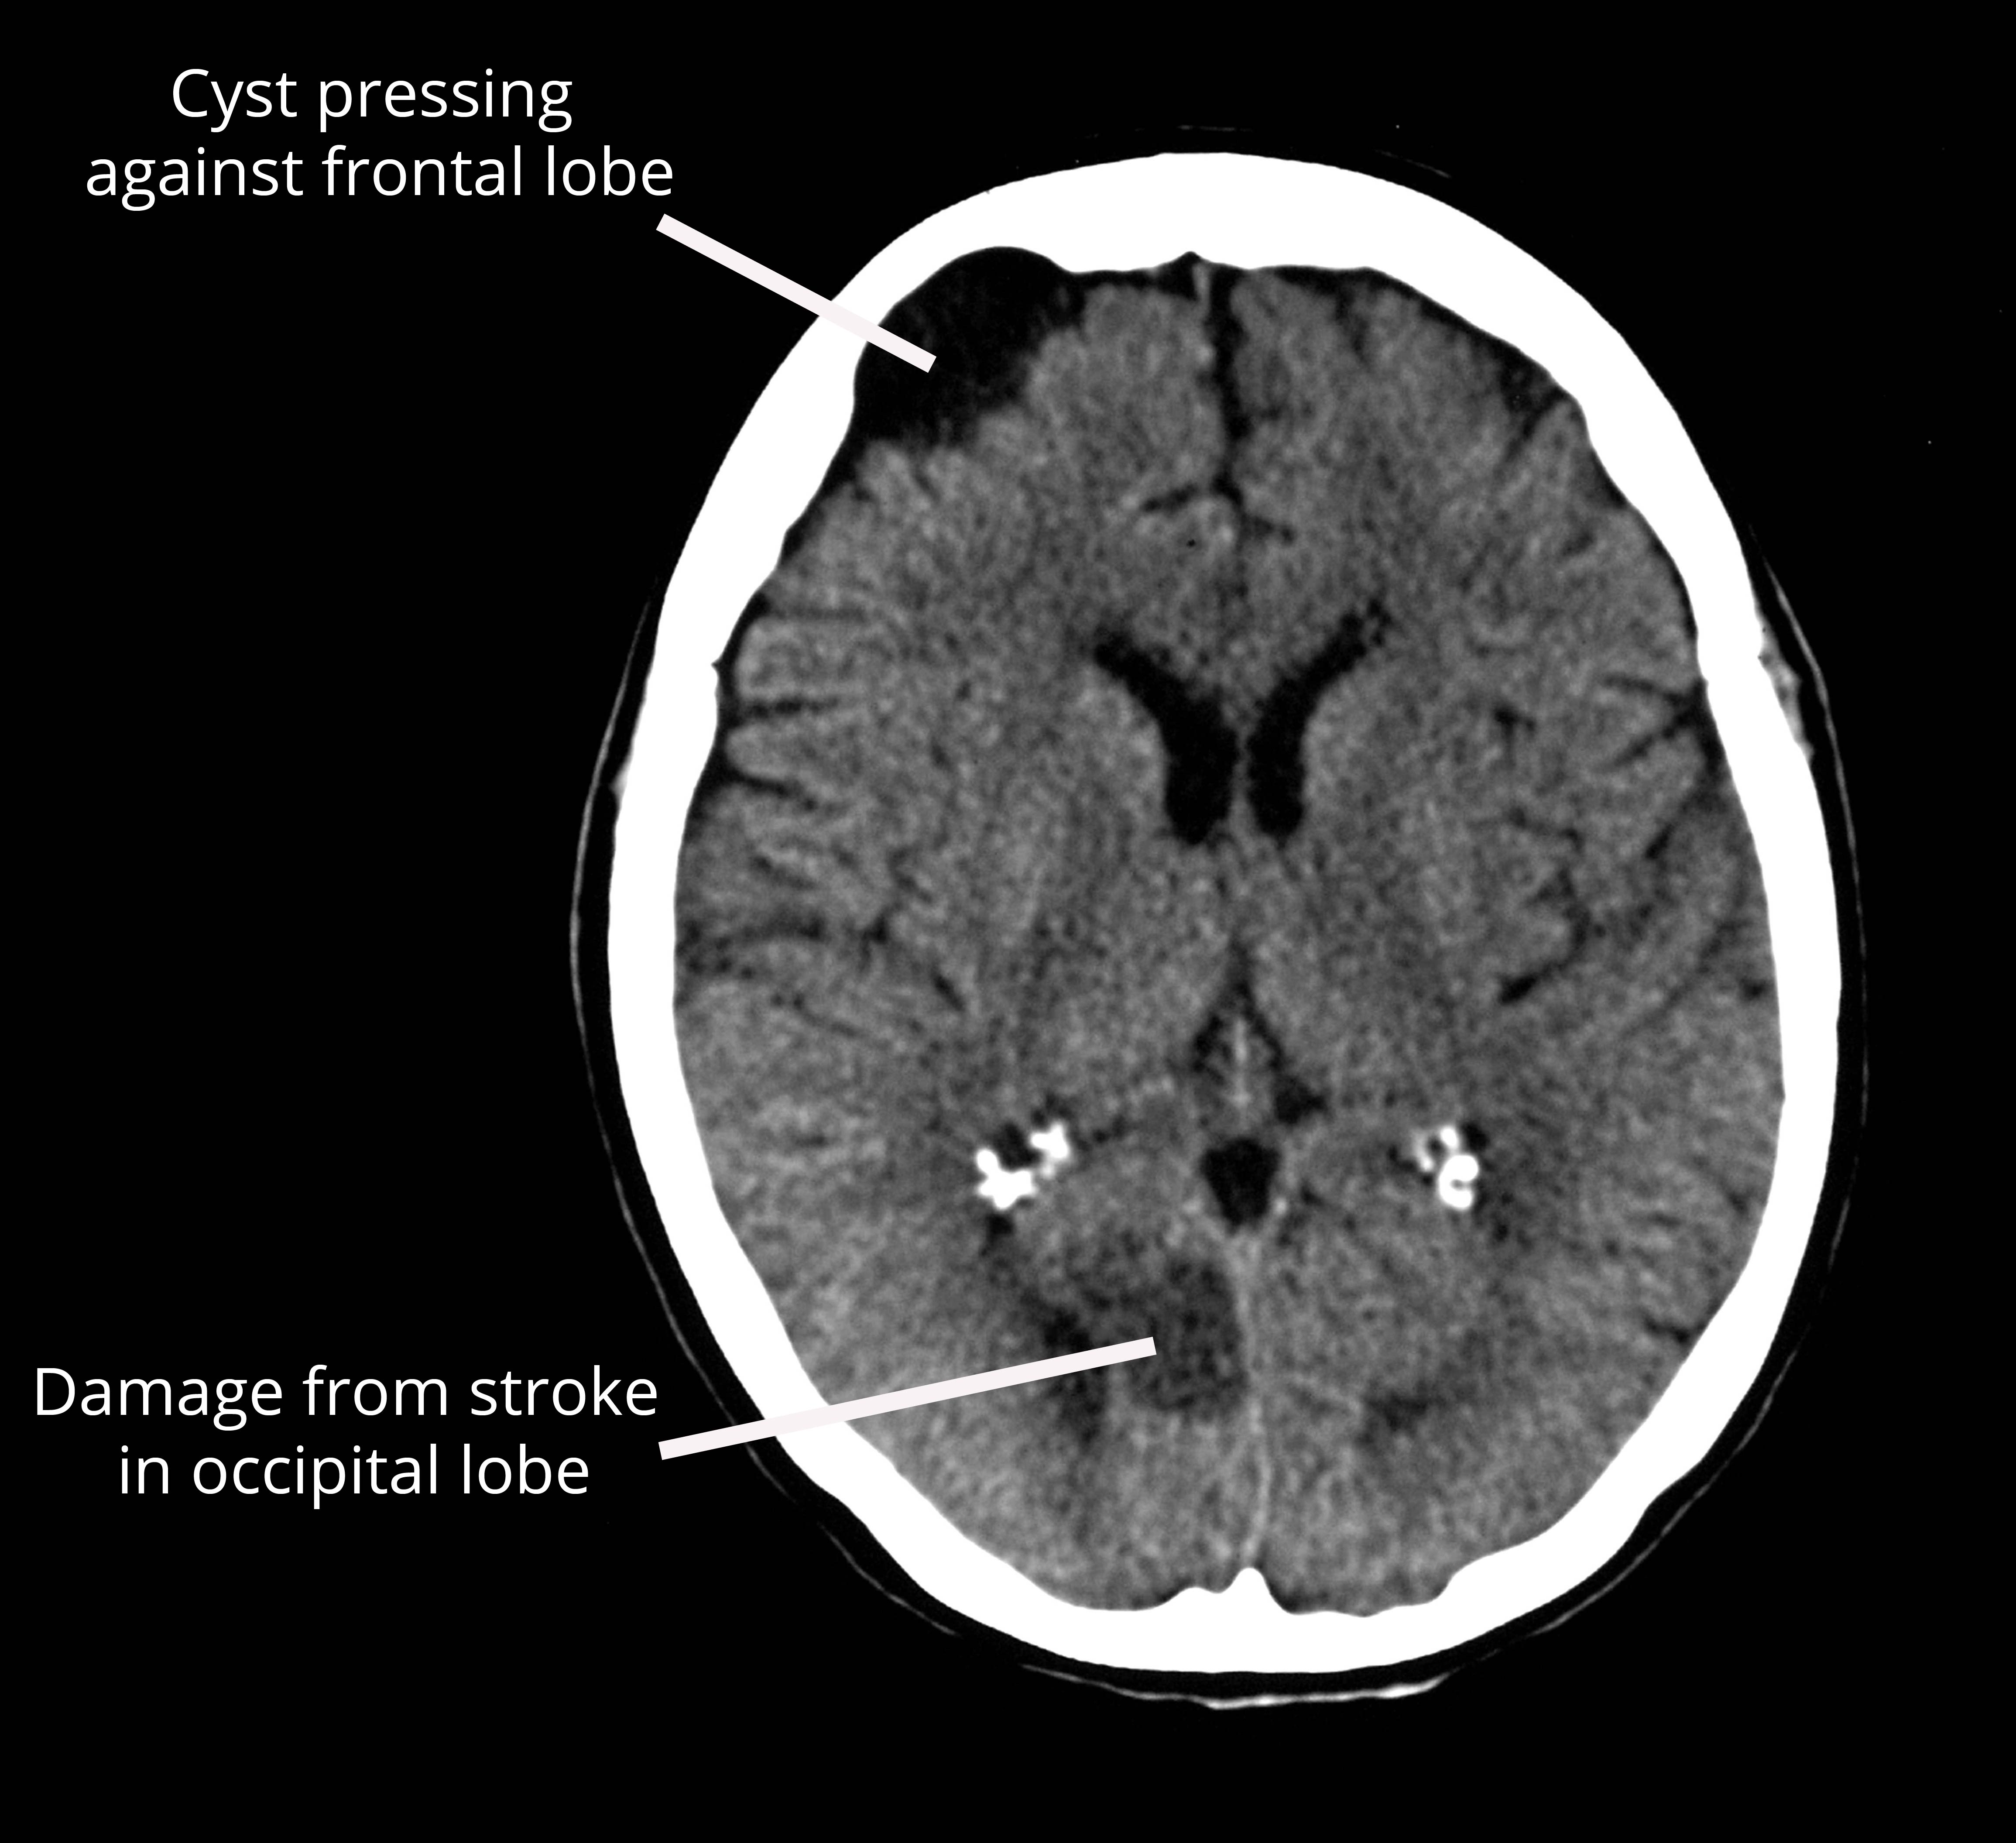 The image is a black and white x-ray photograph of the brain.  It shows a horizontal slice of the brain, where the skull is white and the inside of the brain is gray.  A large black mass at the front of the brain represents a cyst pressing against the frontal lobe.  A fuzzy dark gray mass near the back of the brain represents damage from a stroke in the occipital lobe. 